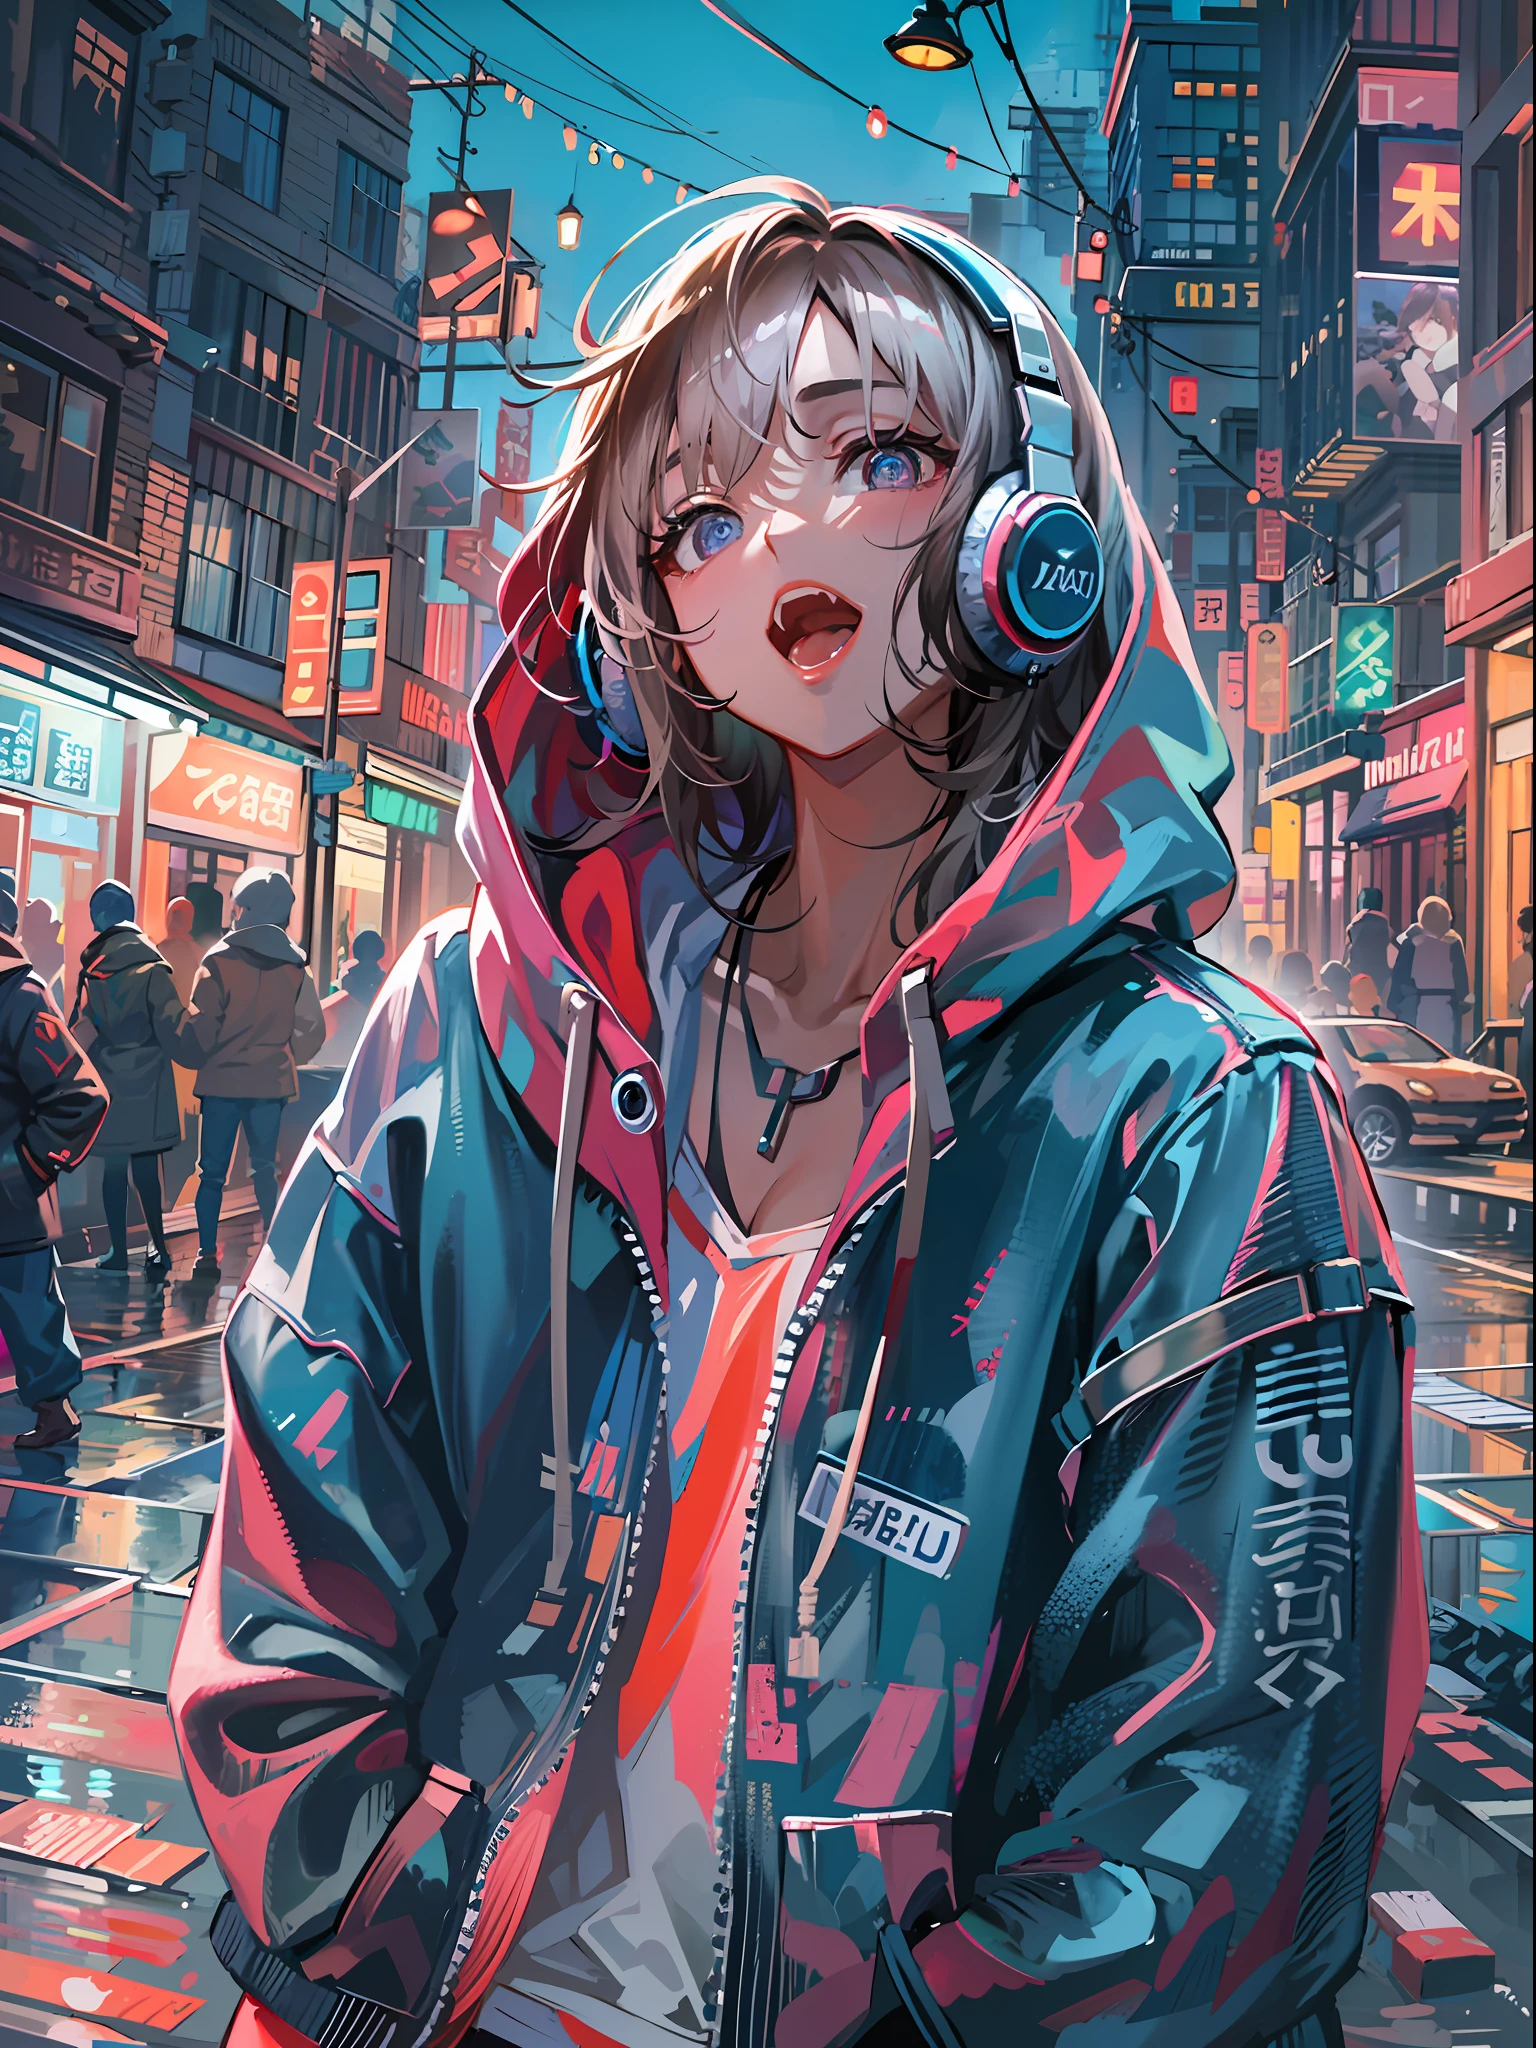 8K resolution、((top-quality))、((​masterpiece))、((Ultra-detail))、1 woman、solo、incredibly absurdness、Oversized hoodies、headphones、Street、plein air、Sateen、Neon Street、Shortcut Hair、Brightly colored eyes、Hands in pockets、shortpants、water dripping